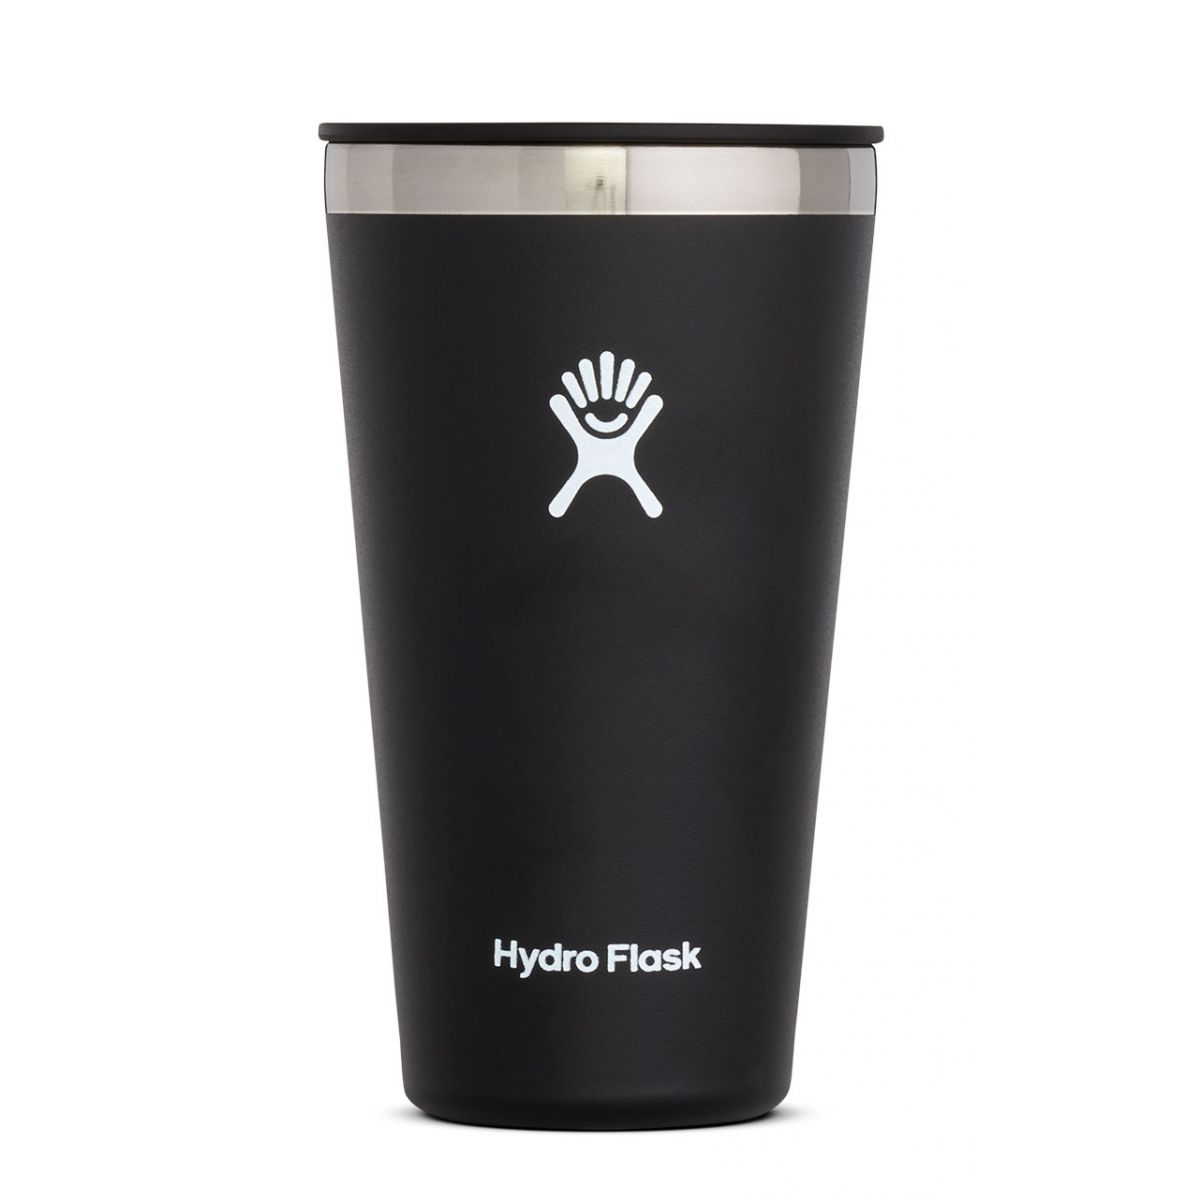 https://etchiton.com/wp-content/uploads/2021/08/hydro-flask-stainless-steel-vacuum-insulated-16-oz-tumbler-black_1.jpg